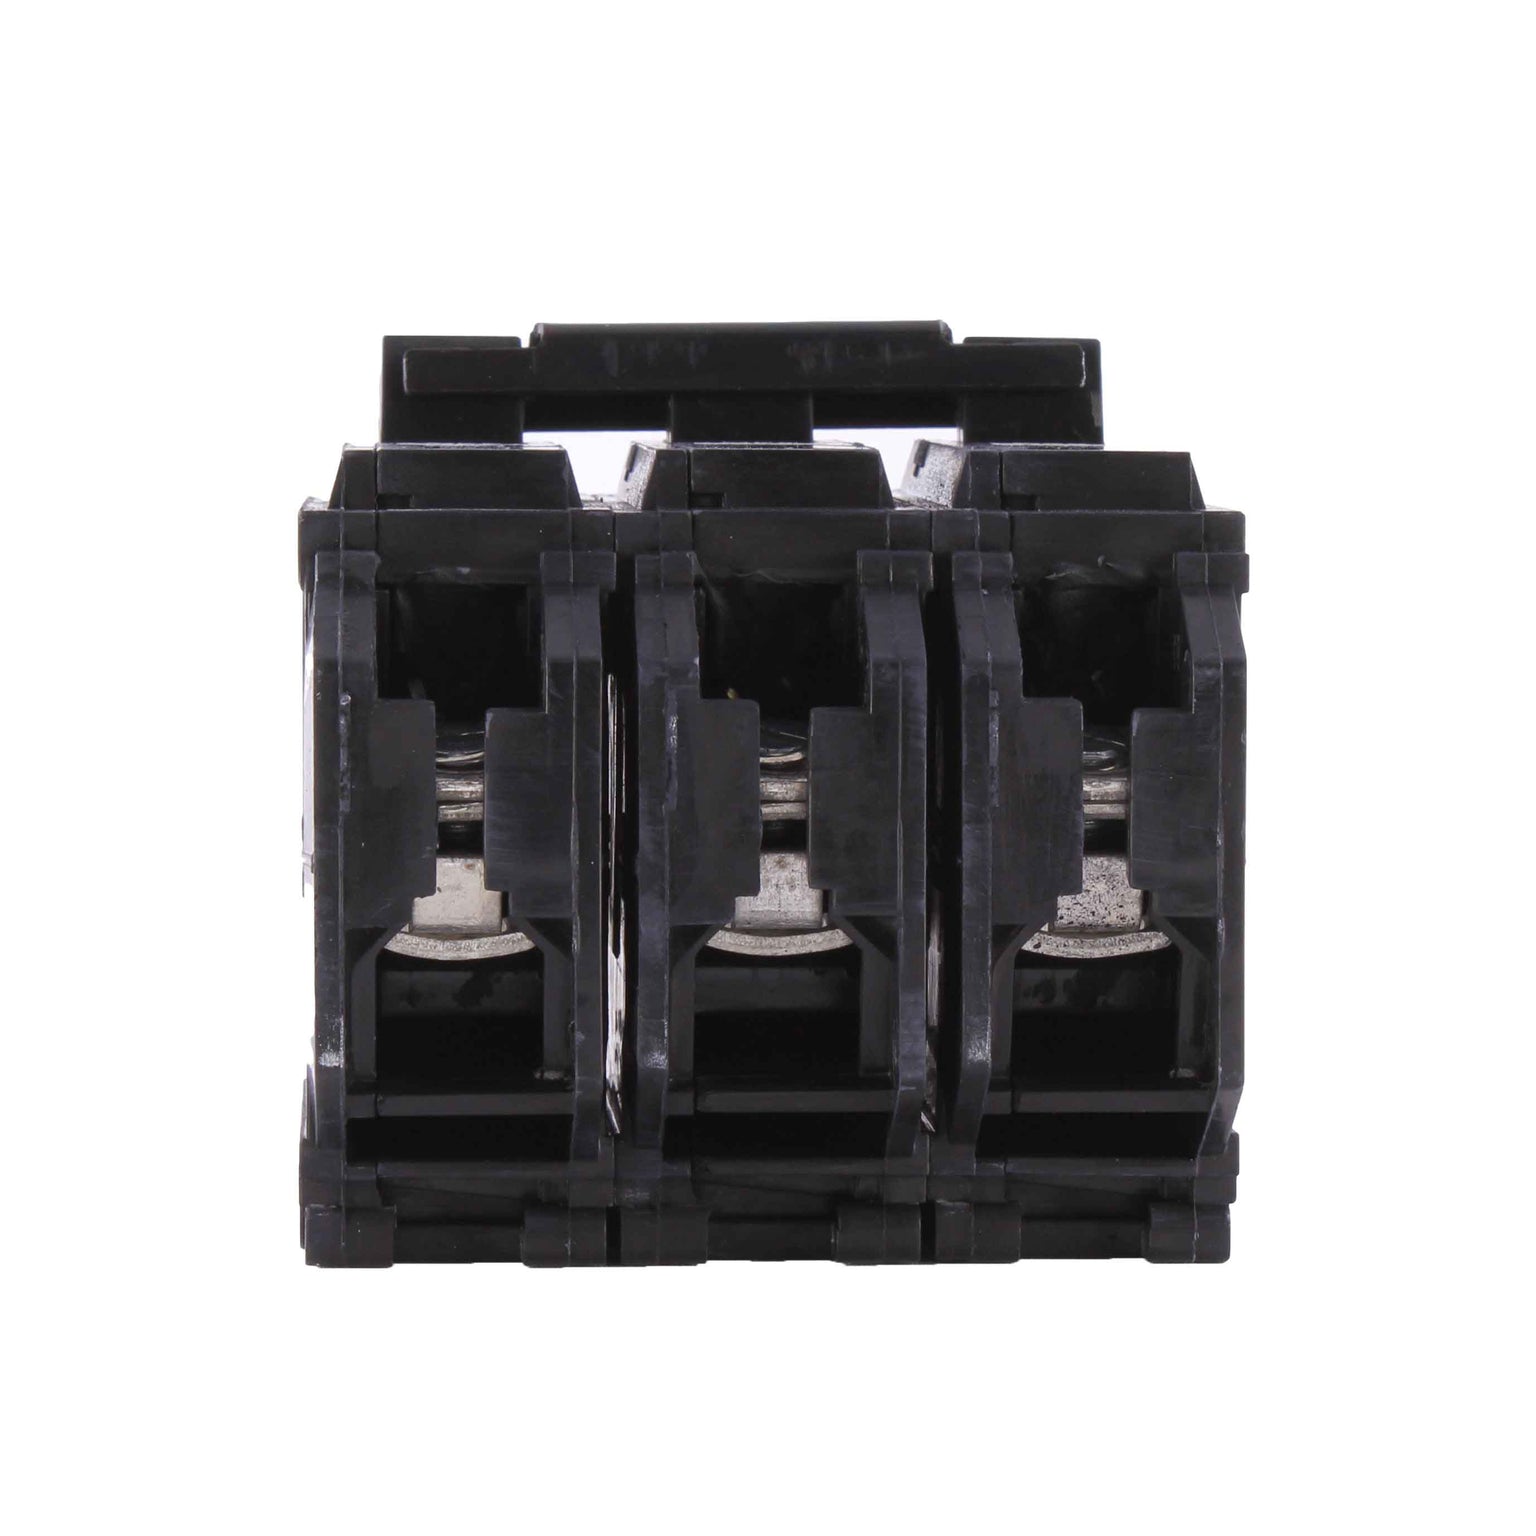 THQL32060ST1 - General Electrics - Molded Case Circuit Breakers